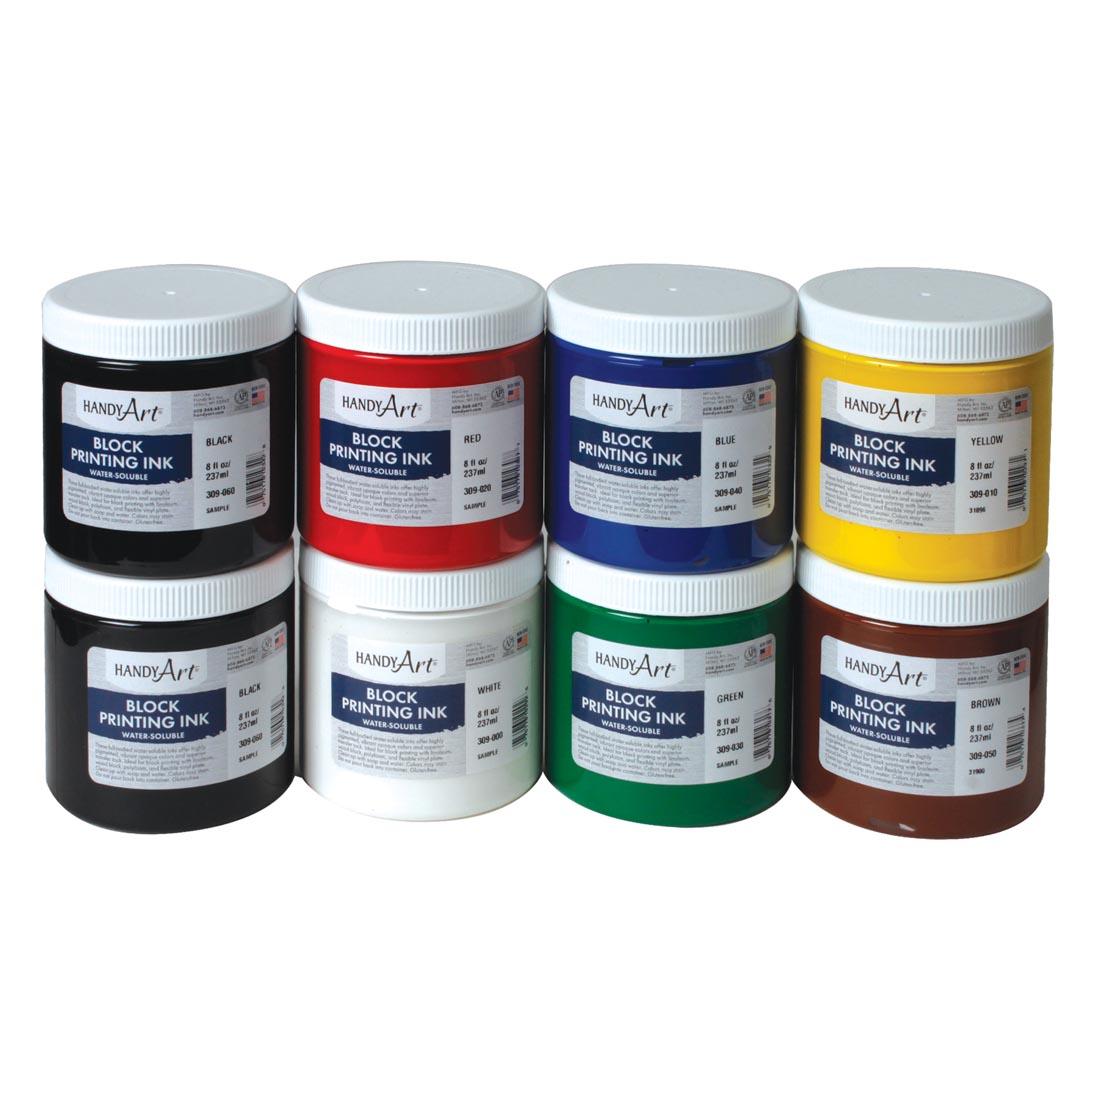 8 jars from the Handy Art Block Ink 7 Color Set